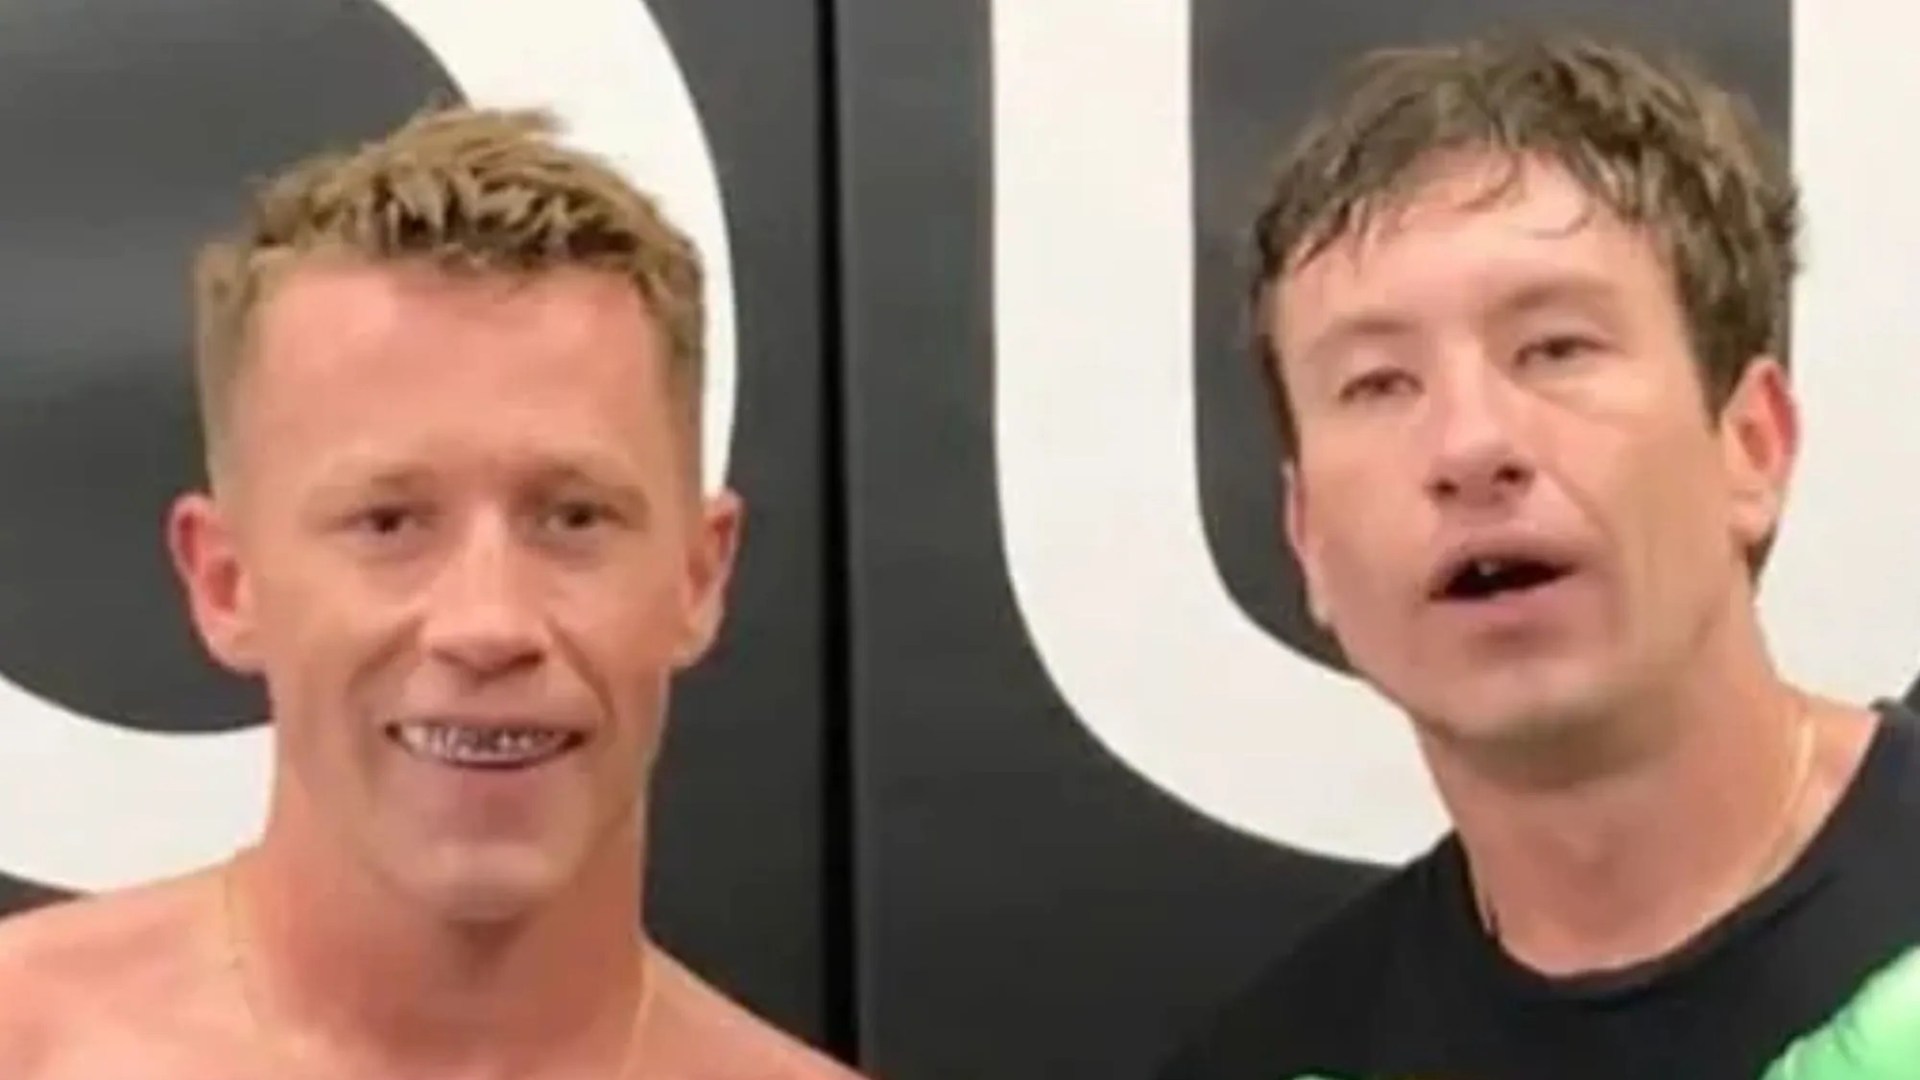 Barry Keoghan hailed as ‘baddest man in Hollywood’ by Irish boxer after sparring session as fans say actor ‘can move’ [Video]